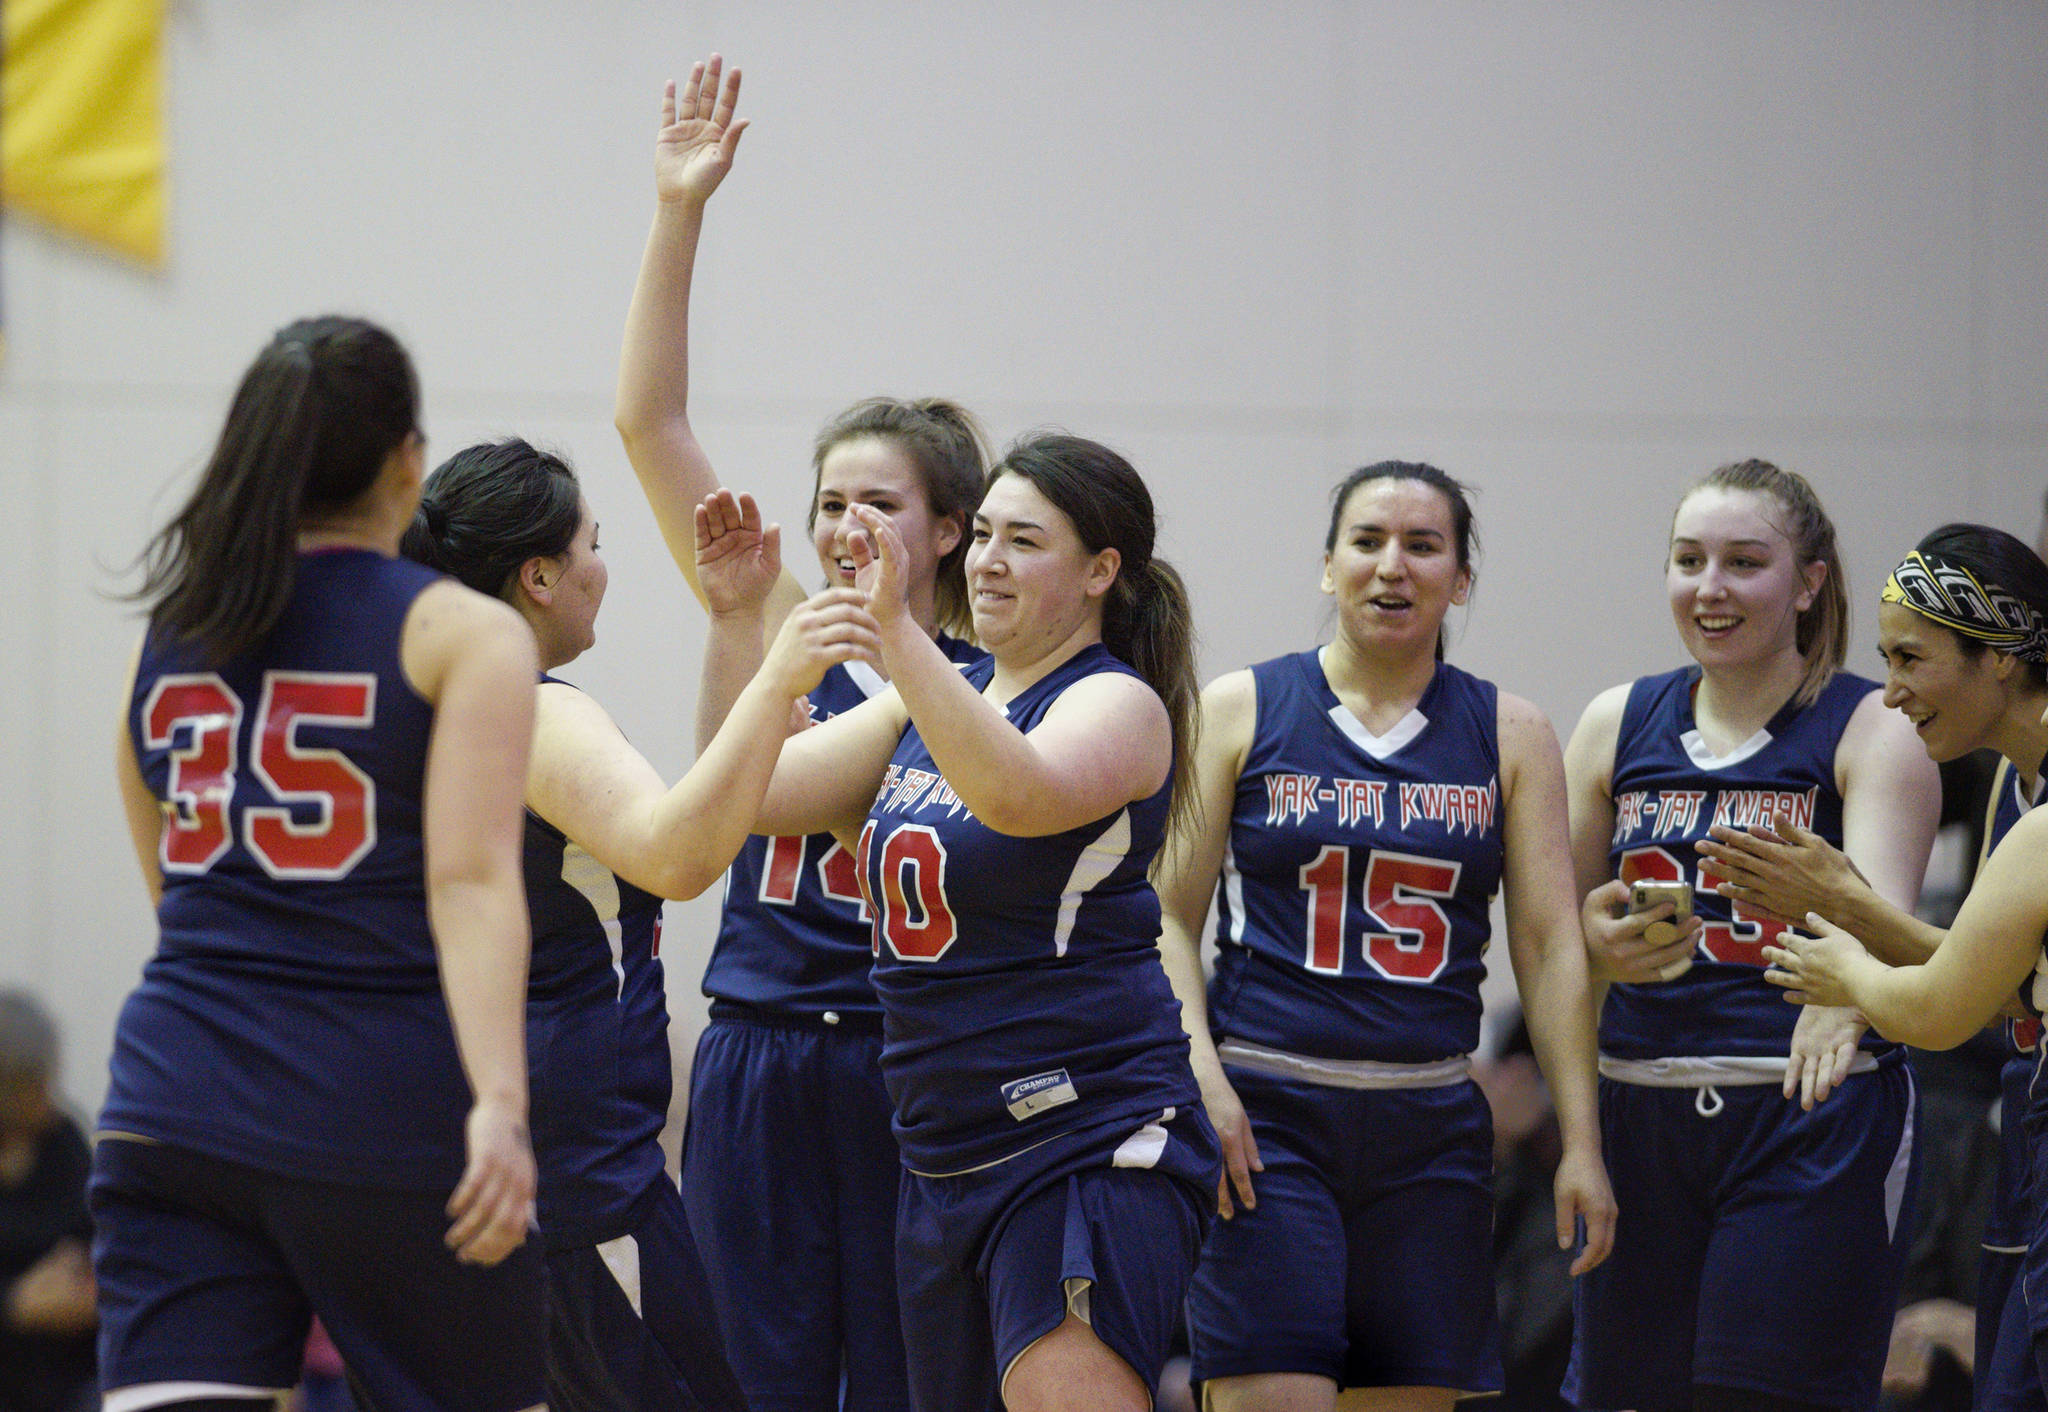 Yakutat’s women’s team celebrates beating Haines in the Women’s final in the Juneau Lion’s Gold Medal Basketball Tournament at Juneau-Douglas High School on Saturday, March 24, 2018. (Michael Penn | Juneau Empire)